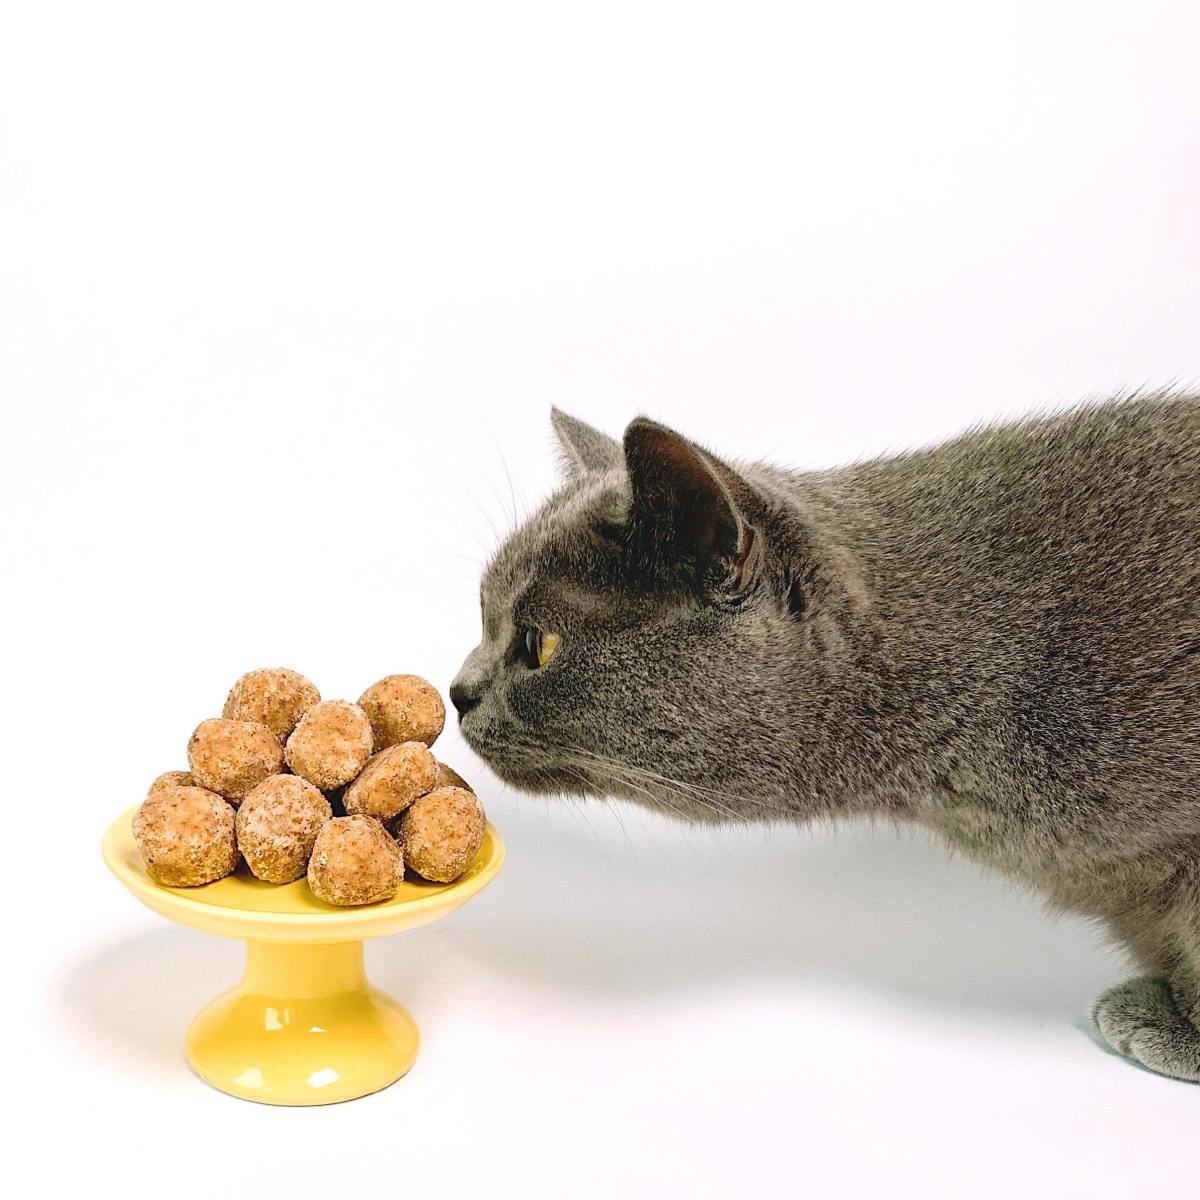 Unlike dogs, cats will starve themselves to death, so finding food that picky cats will eat is critical. 